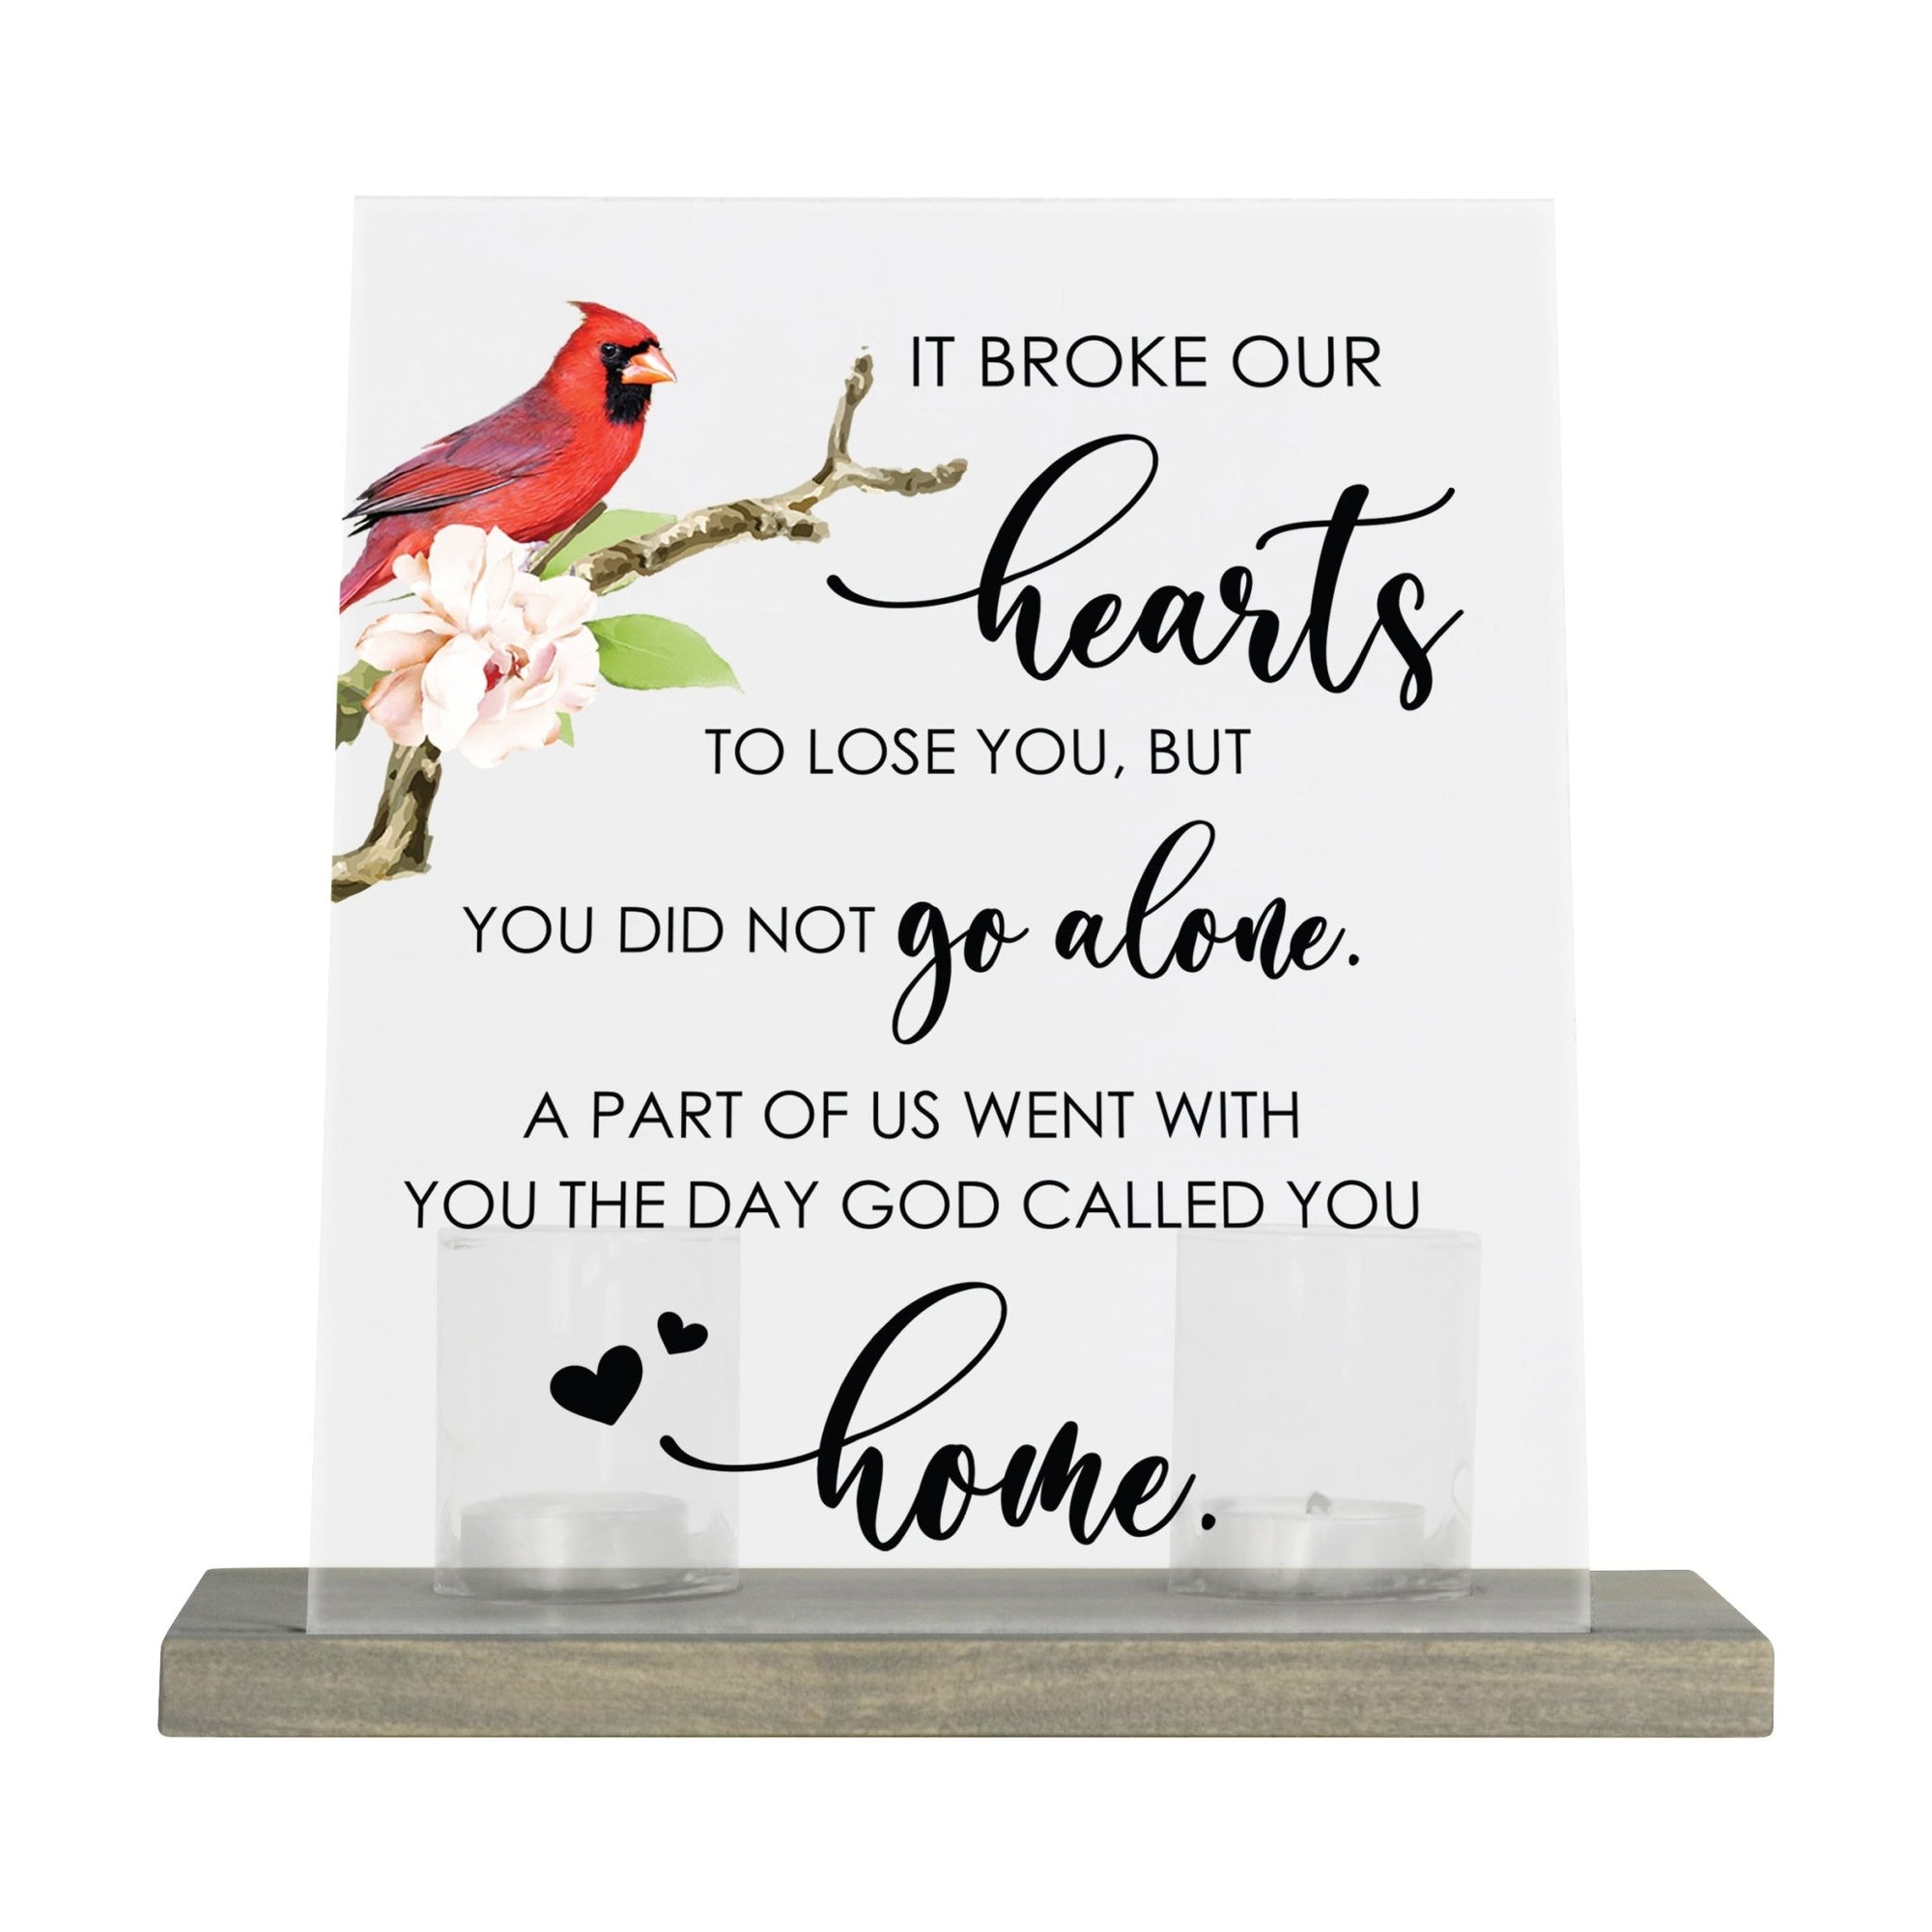 Vintage Memorial Cardinal Acrylic Sign Candle Holder With Wood Base And Glass Votives For Home Décor | It Broke My Heart - LifeSong Milestones